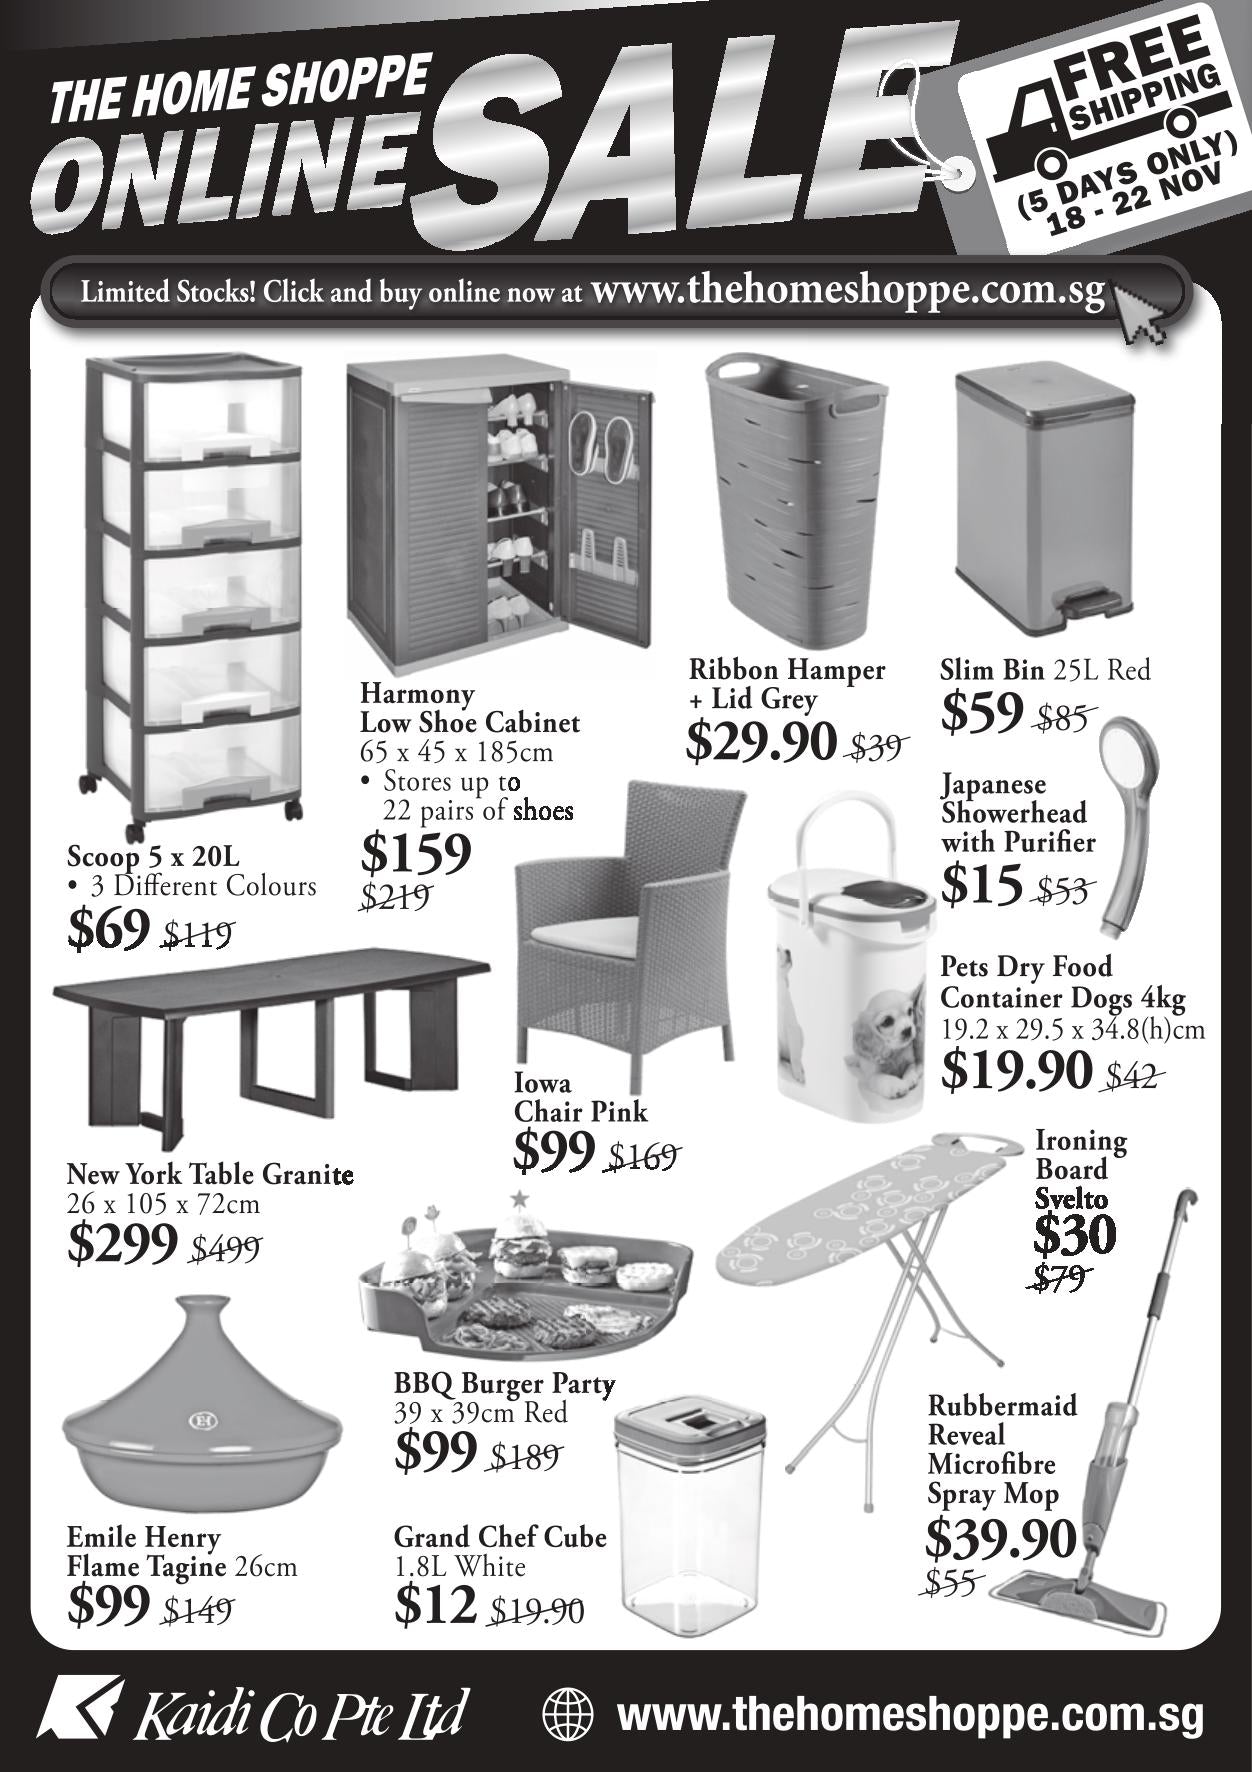 The Home Shoppe Online Sale - Free Shipping